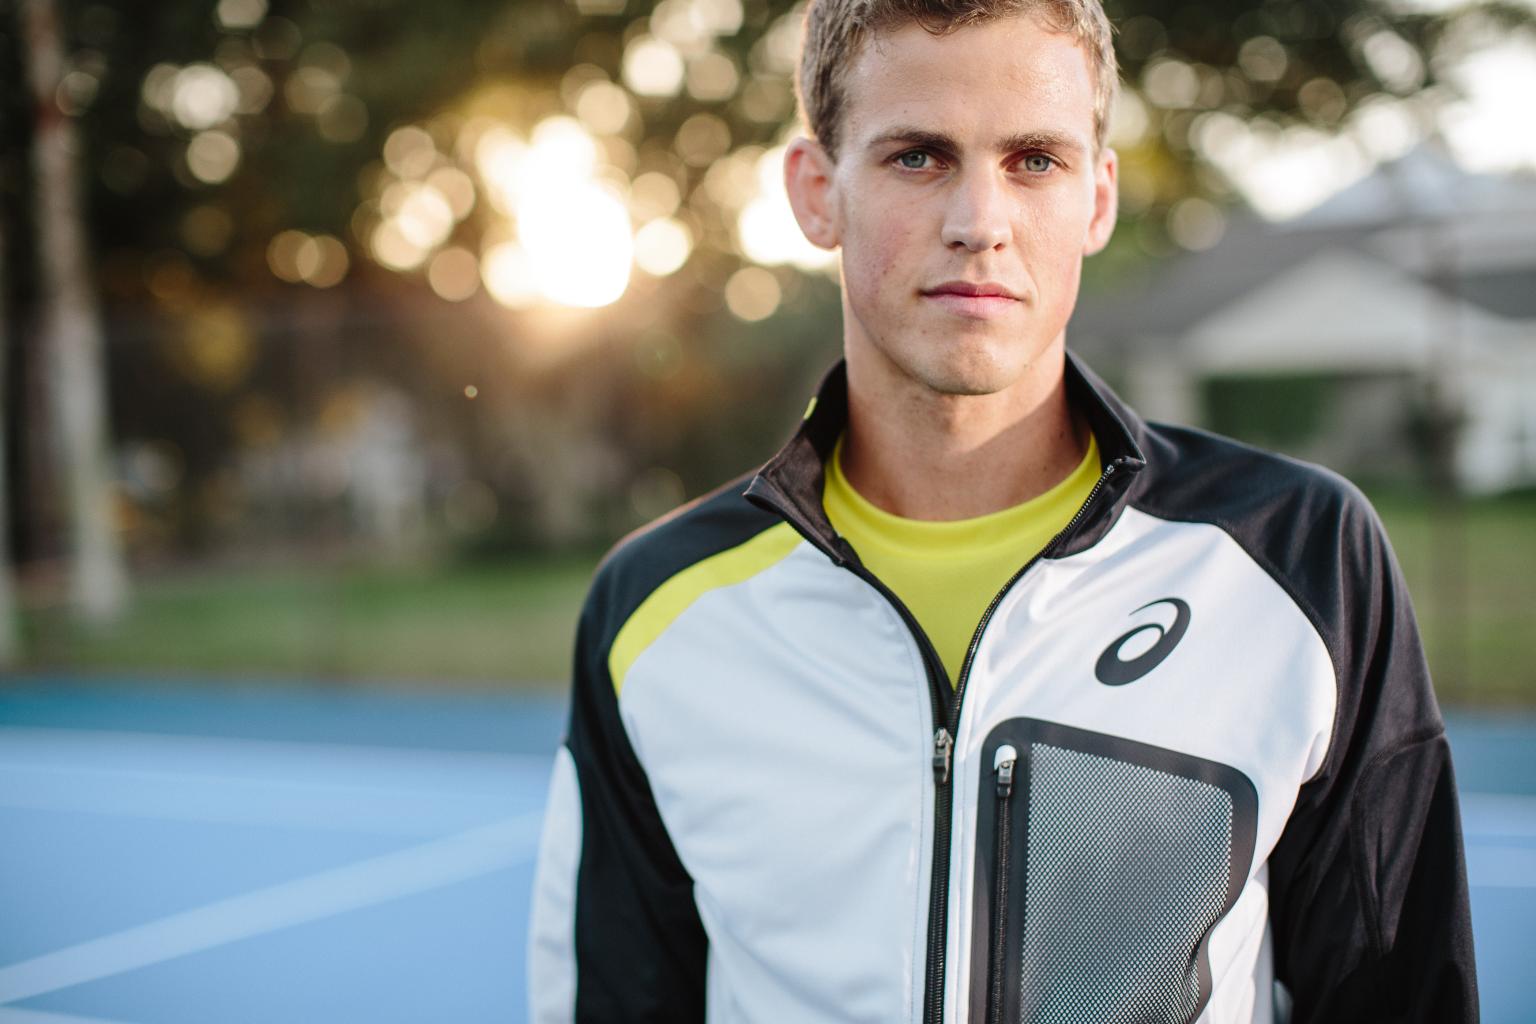 Top-Ranked Canadian Player Vasek Pospisil Re-Signs With ASICS